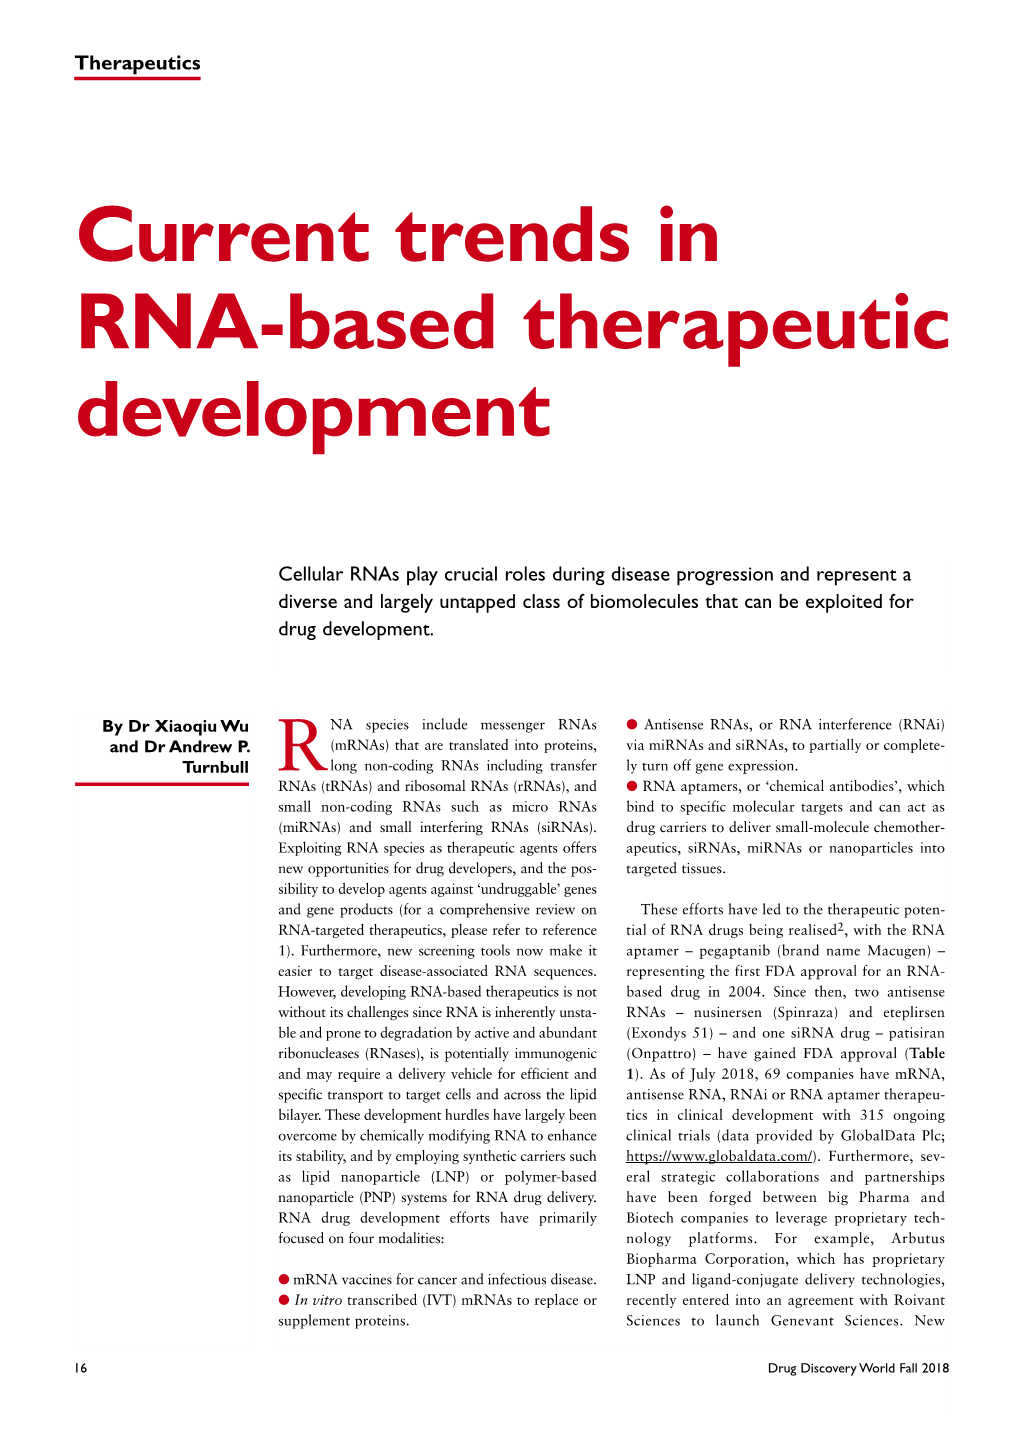 Current Trends in RNA-Based Therapeutic Development